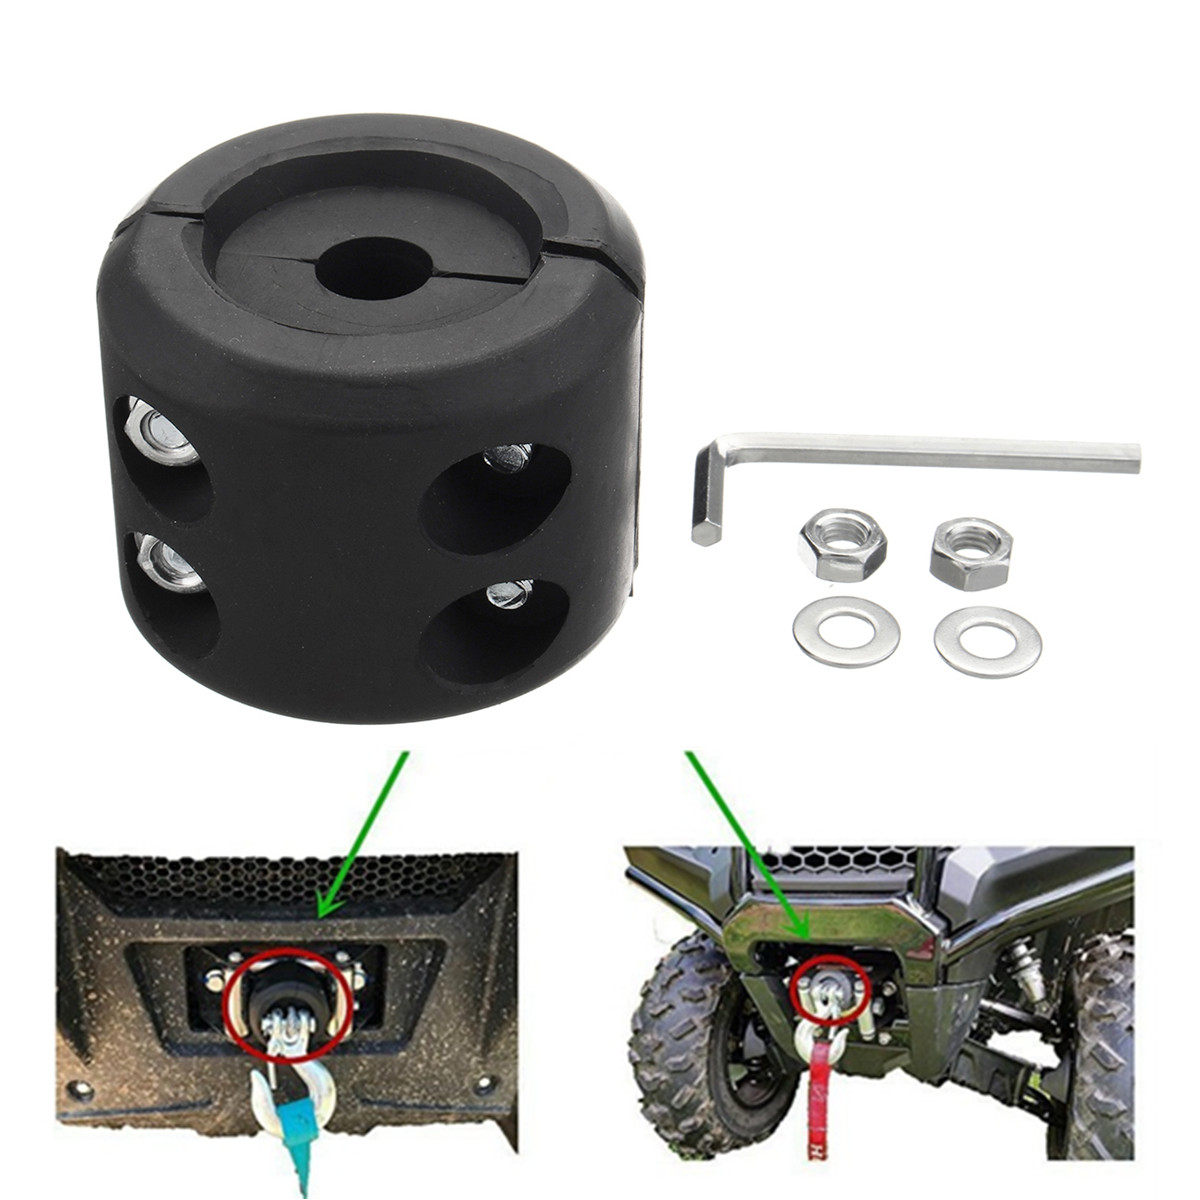 High Quality New Cable Hook Stopper For Jeep KFI ATV UTV Winch Cable Hook Mount Stop Stopper Motor Rubber Cushion ATV-SCHS